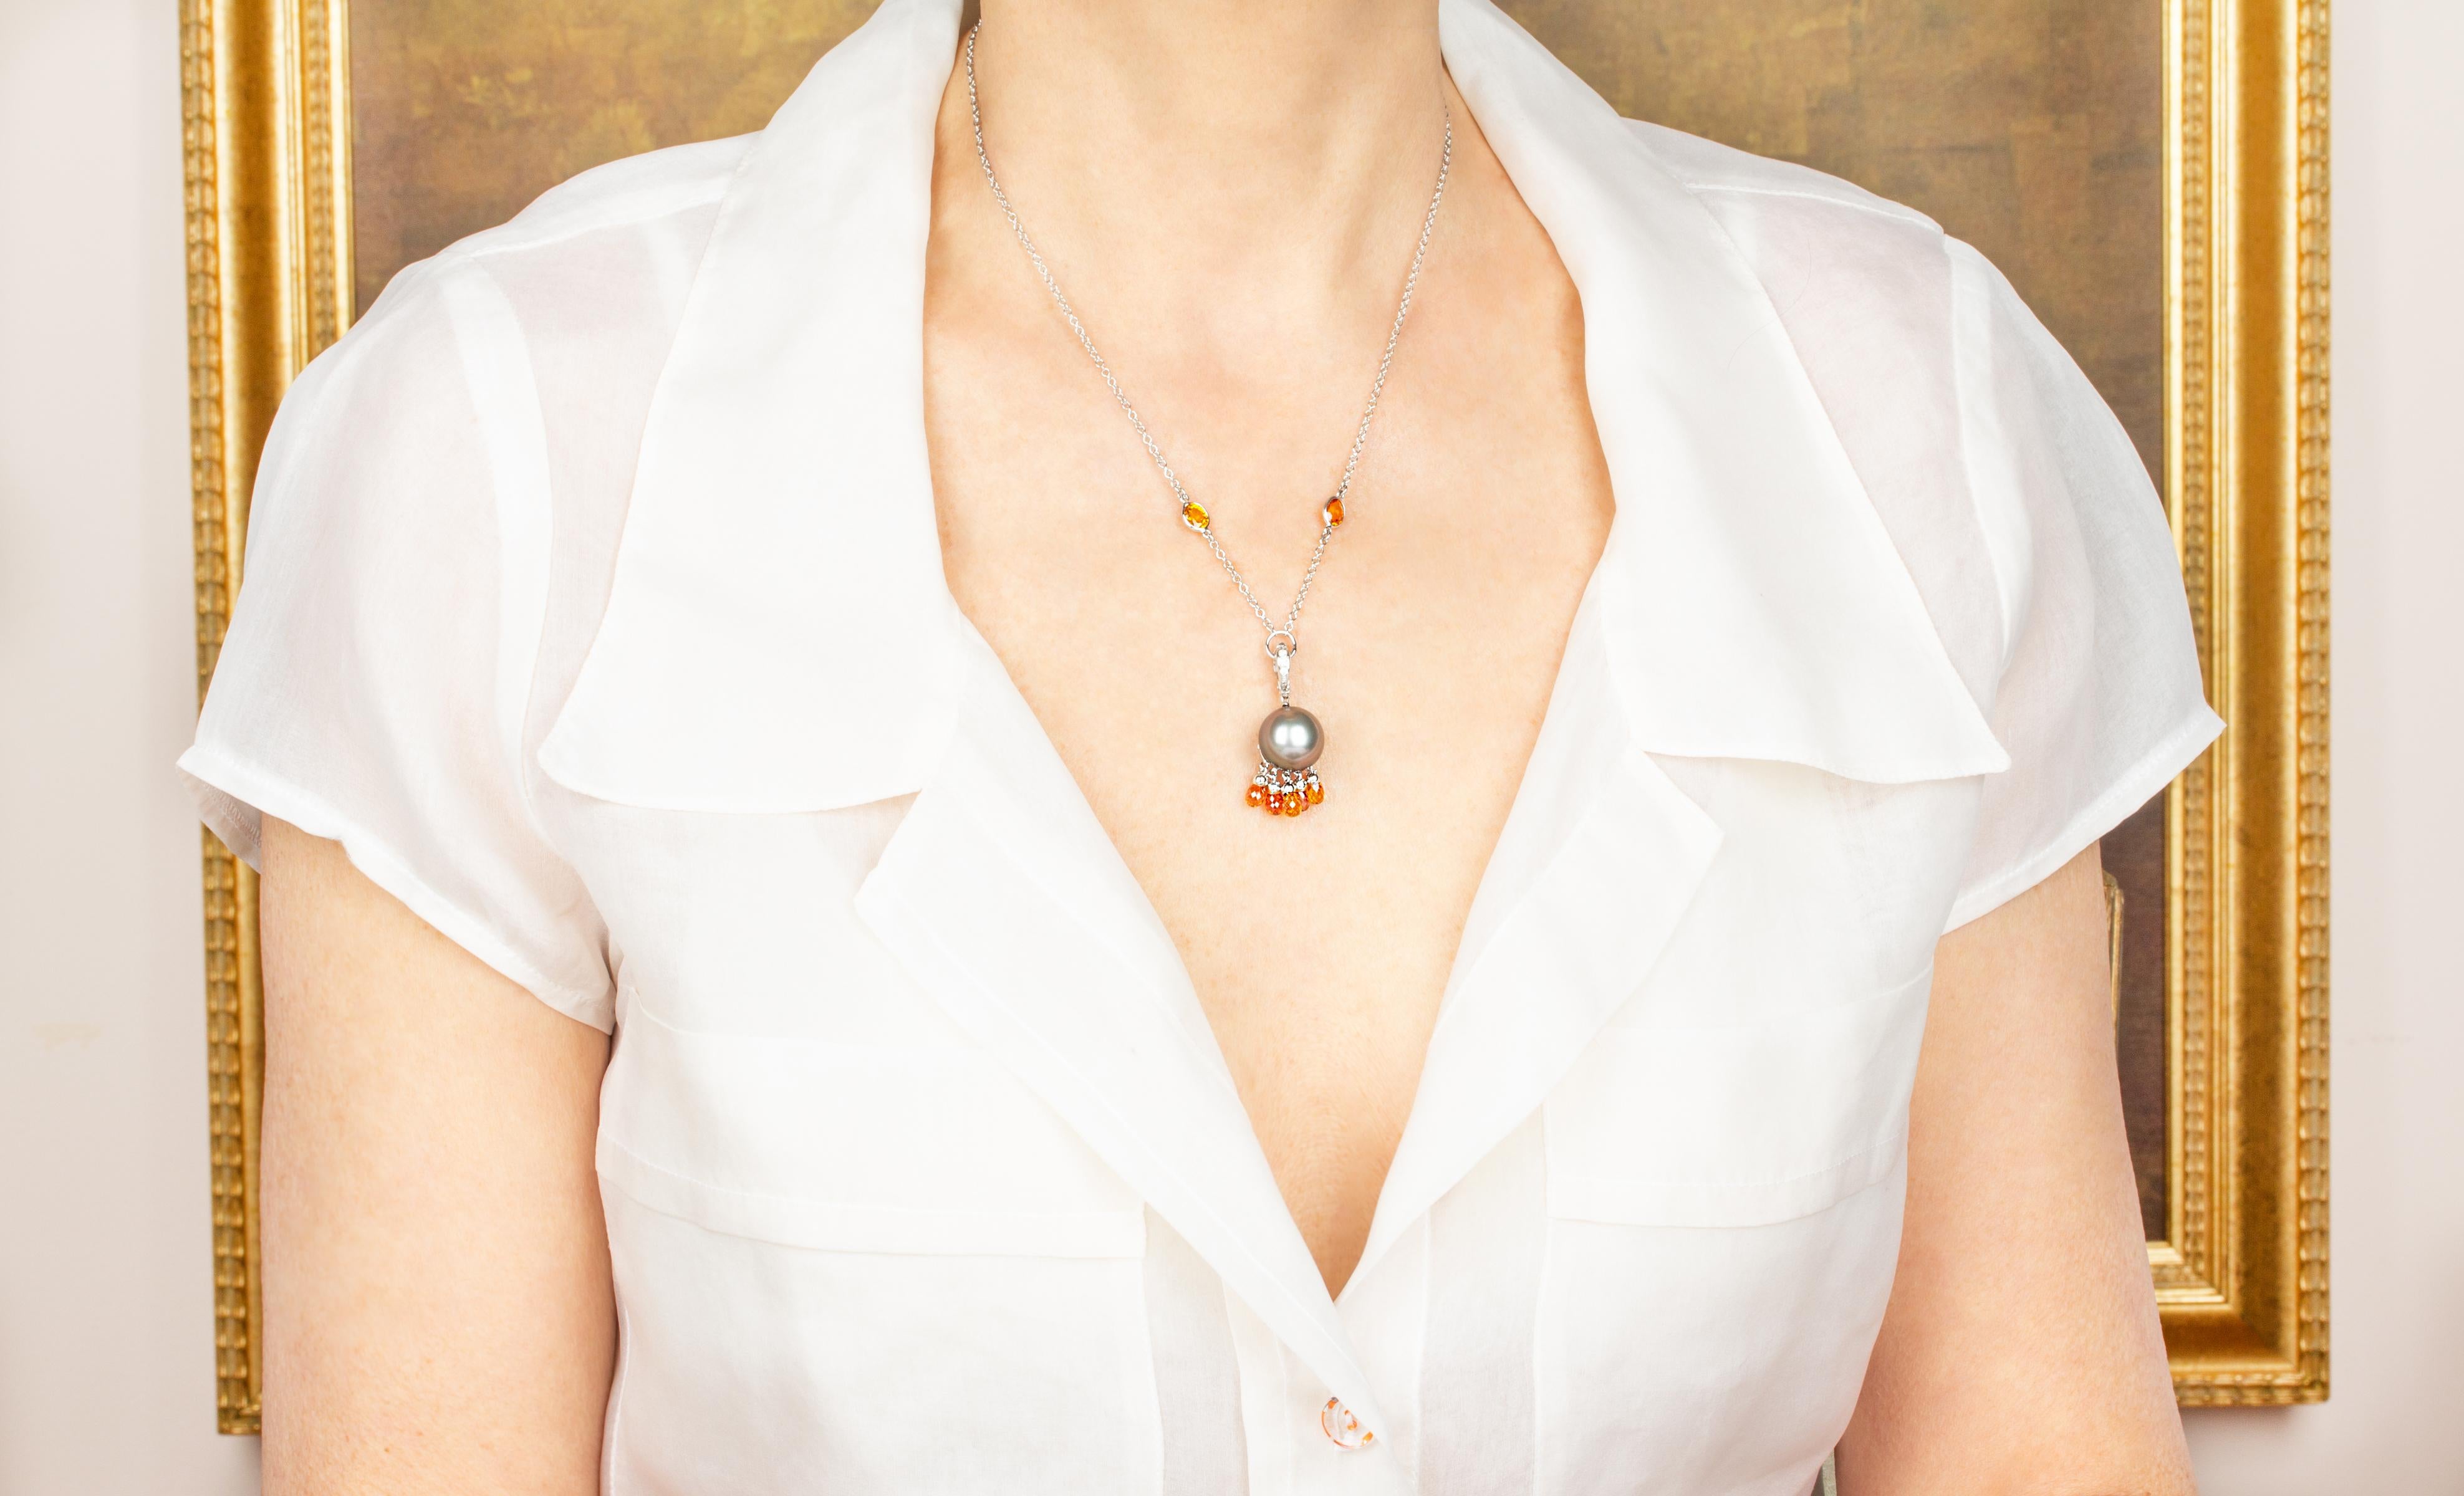 This pearl pendant necklace features a Tahitian pearl of 13.5mm diameter suspending 5 orange briolette sapphires. It hangs by a hook set with diamonds to a 17” 18 carat white gold chain decorated with 2 motifs of orange sapphire. The pendant is